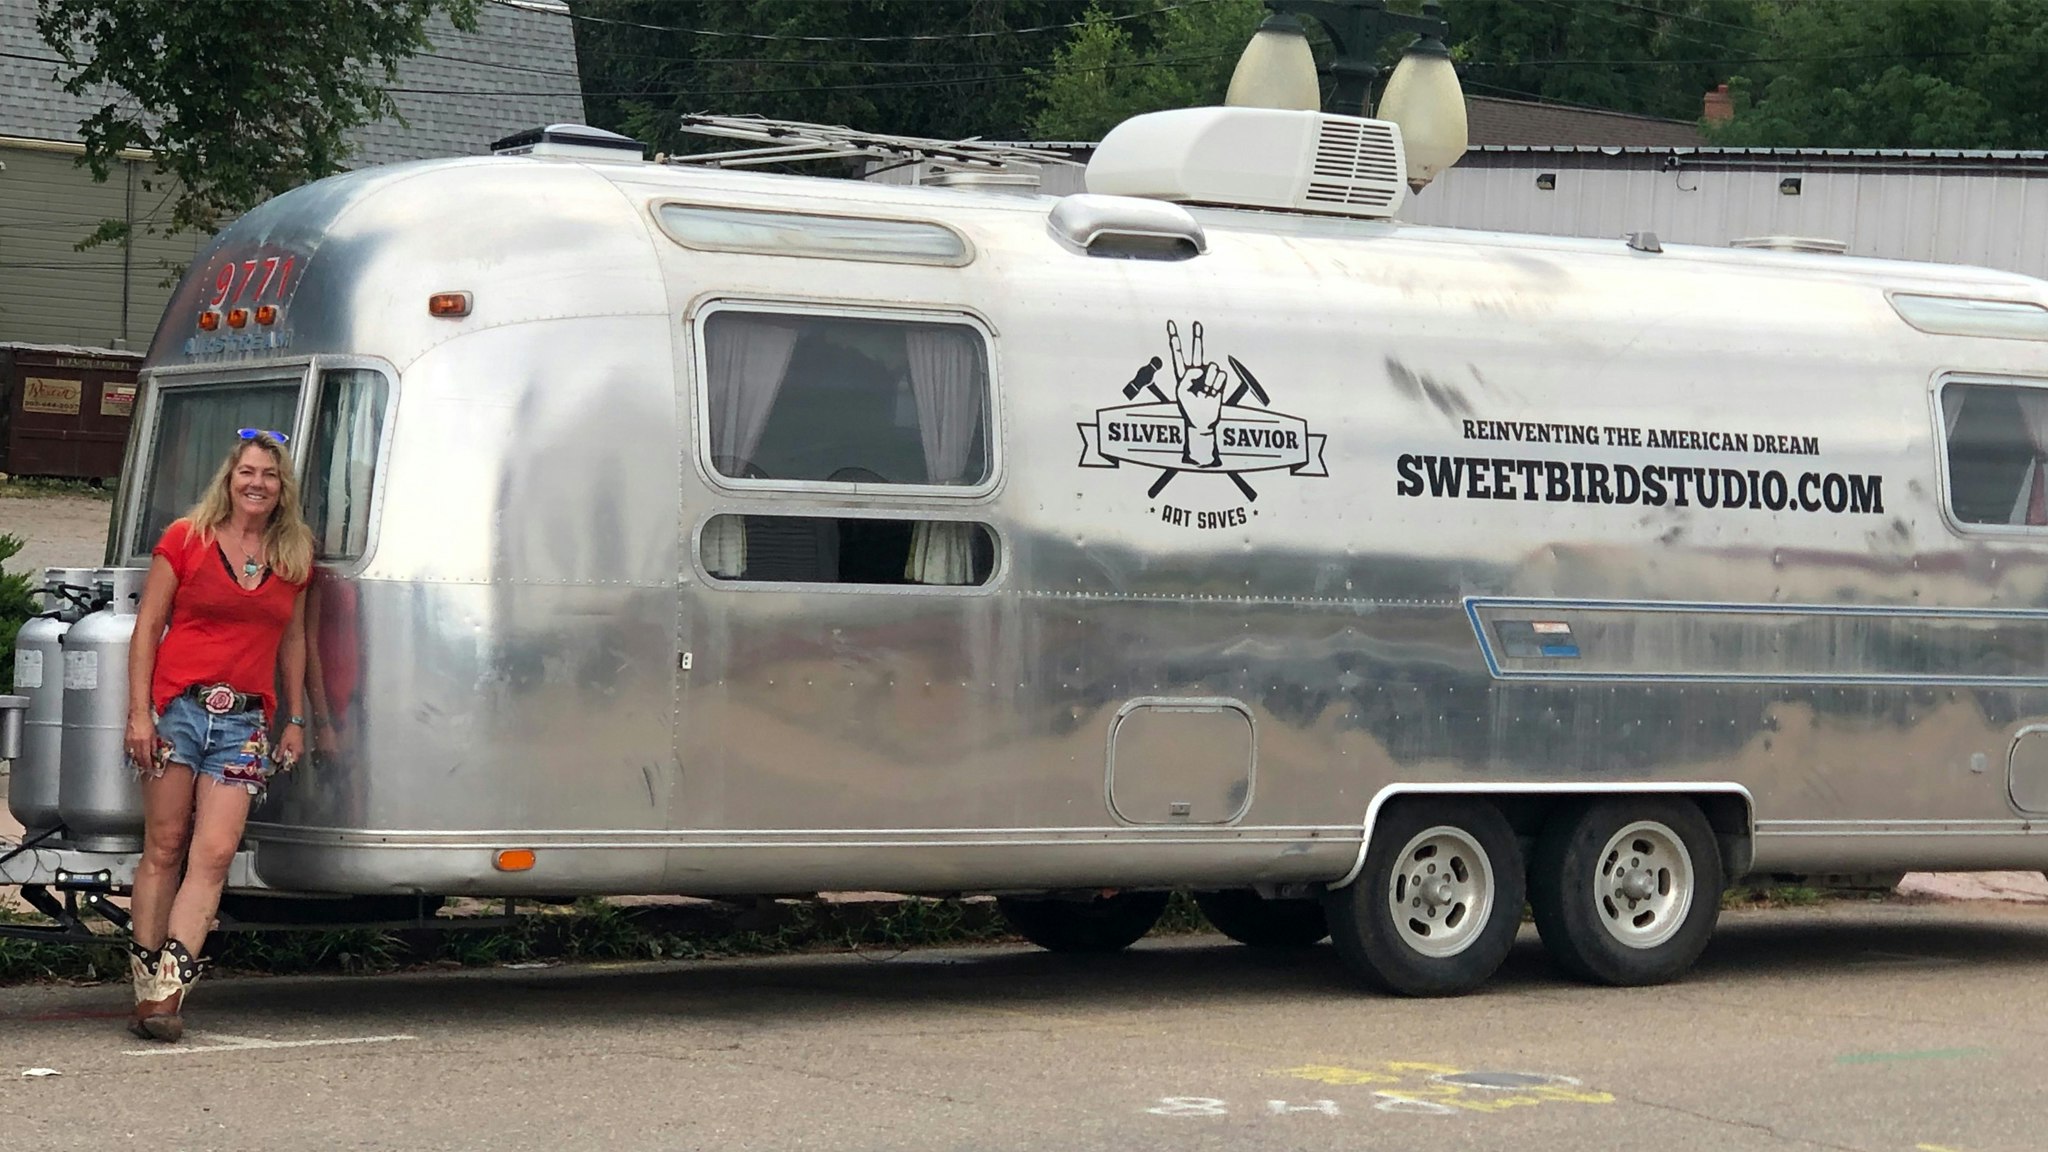 Sweet Bird Studio owner in from of her Airstream